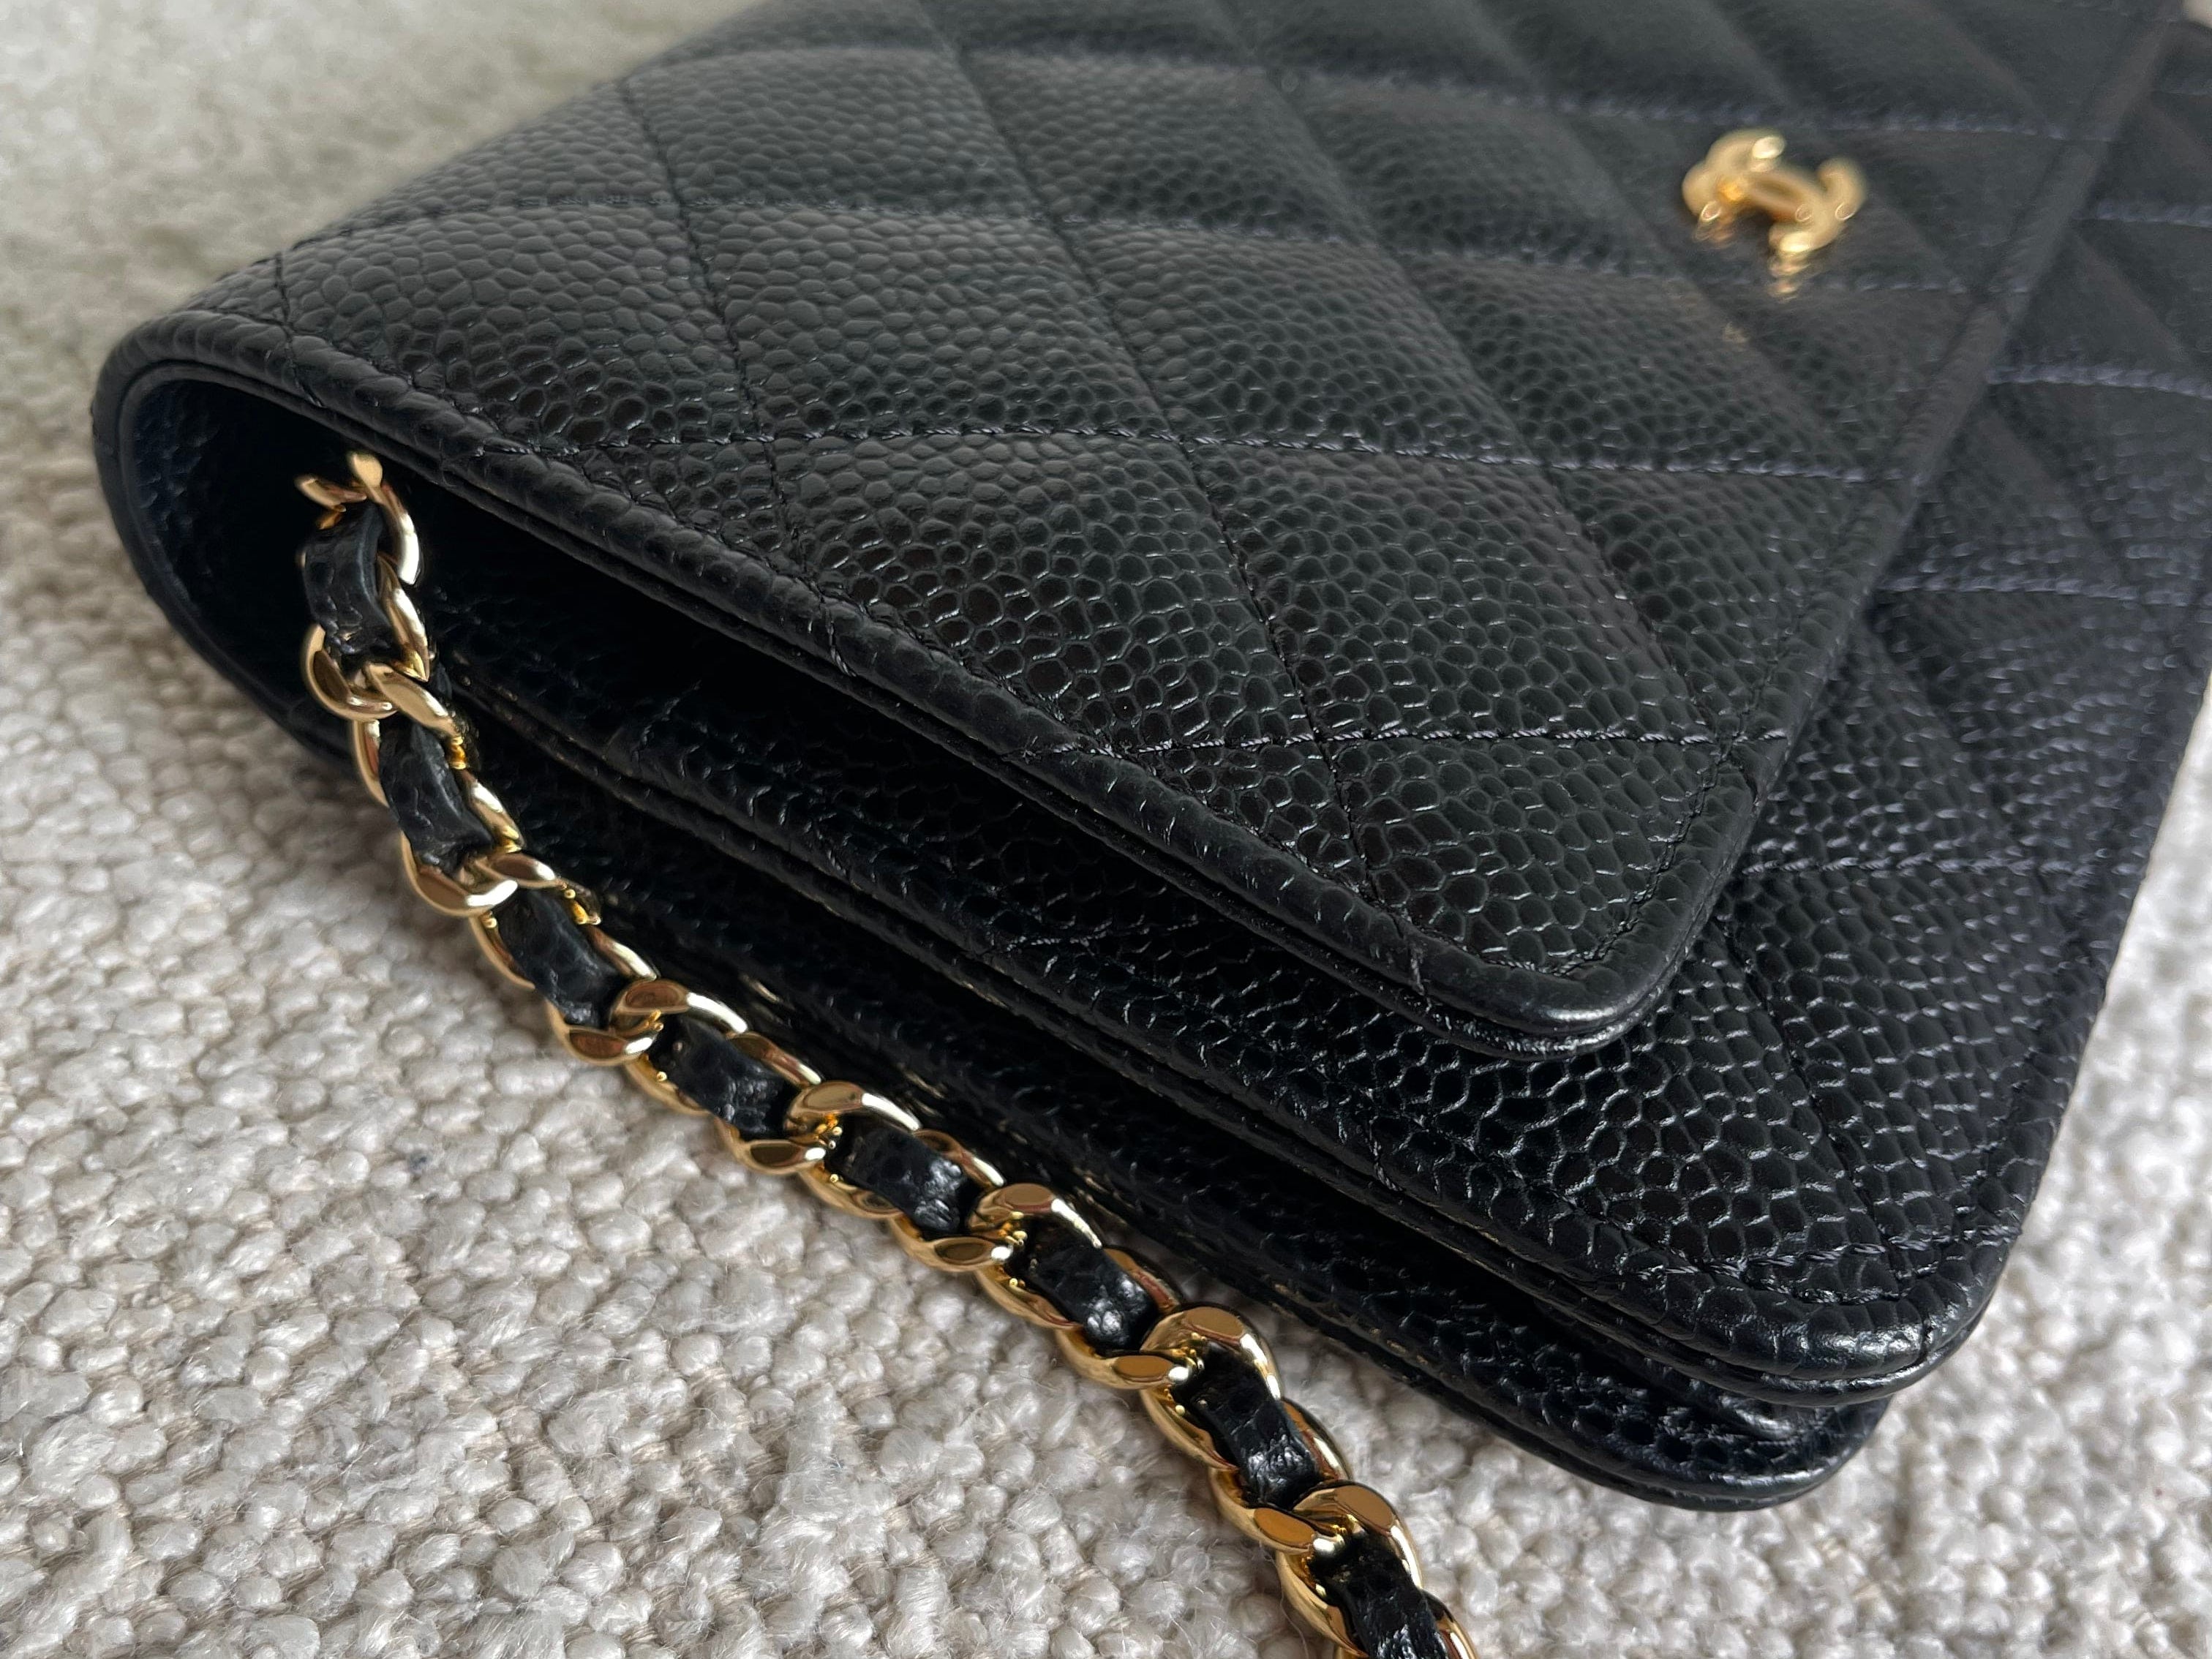 CHANEL Handbag Chanel Black Caviar Quilted Wallet on Chain WOC GHW - Redeluxe